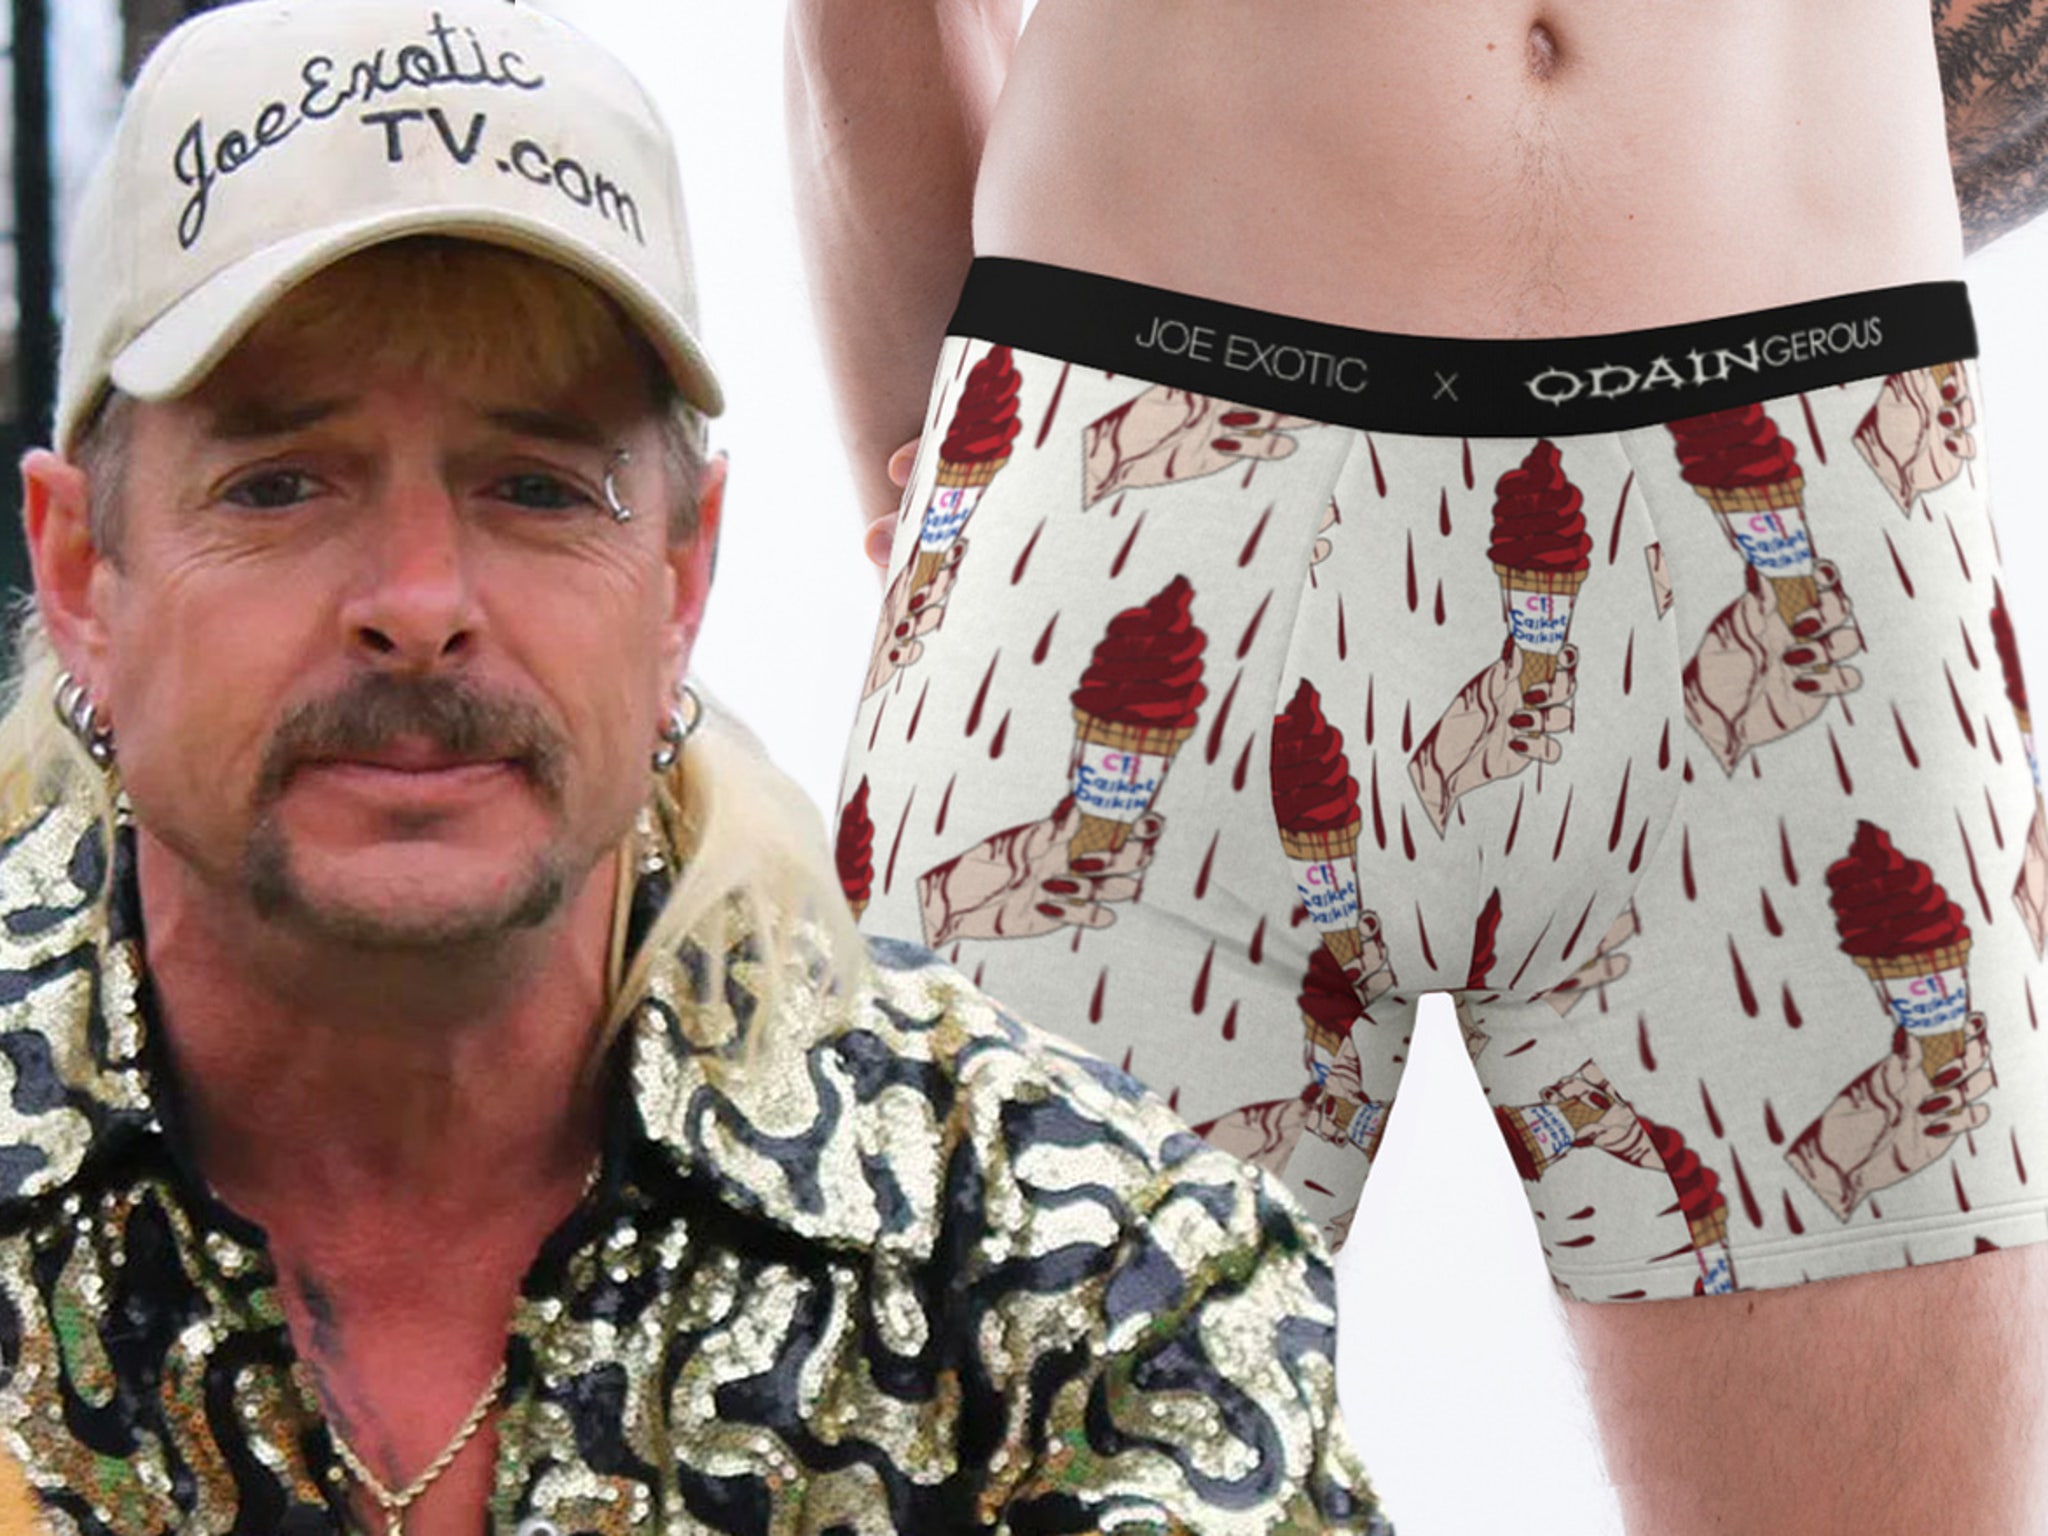 Tiger King's Joe Exotic launches new underwear line with his face plastered  across the crotch of leopard-print boxers